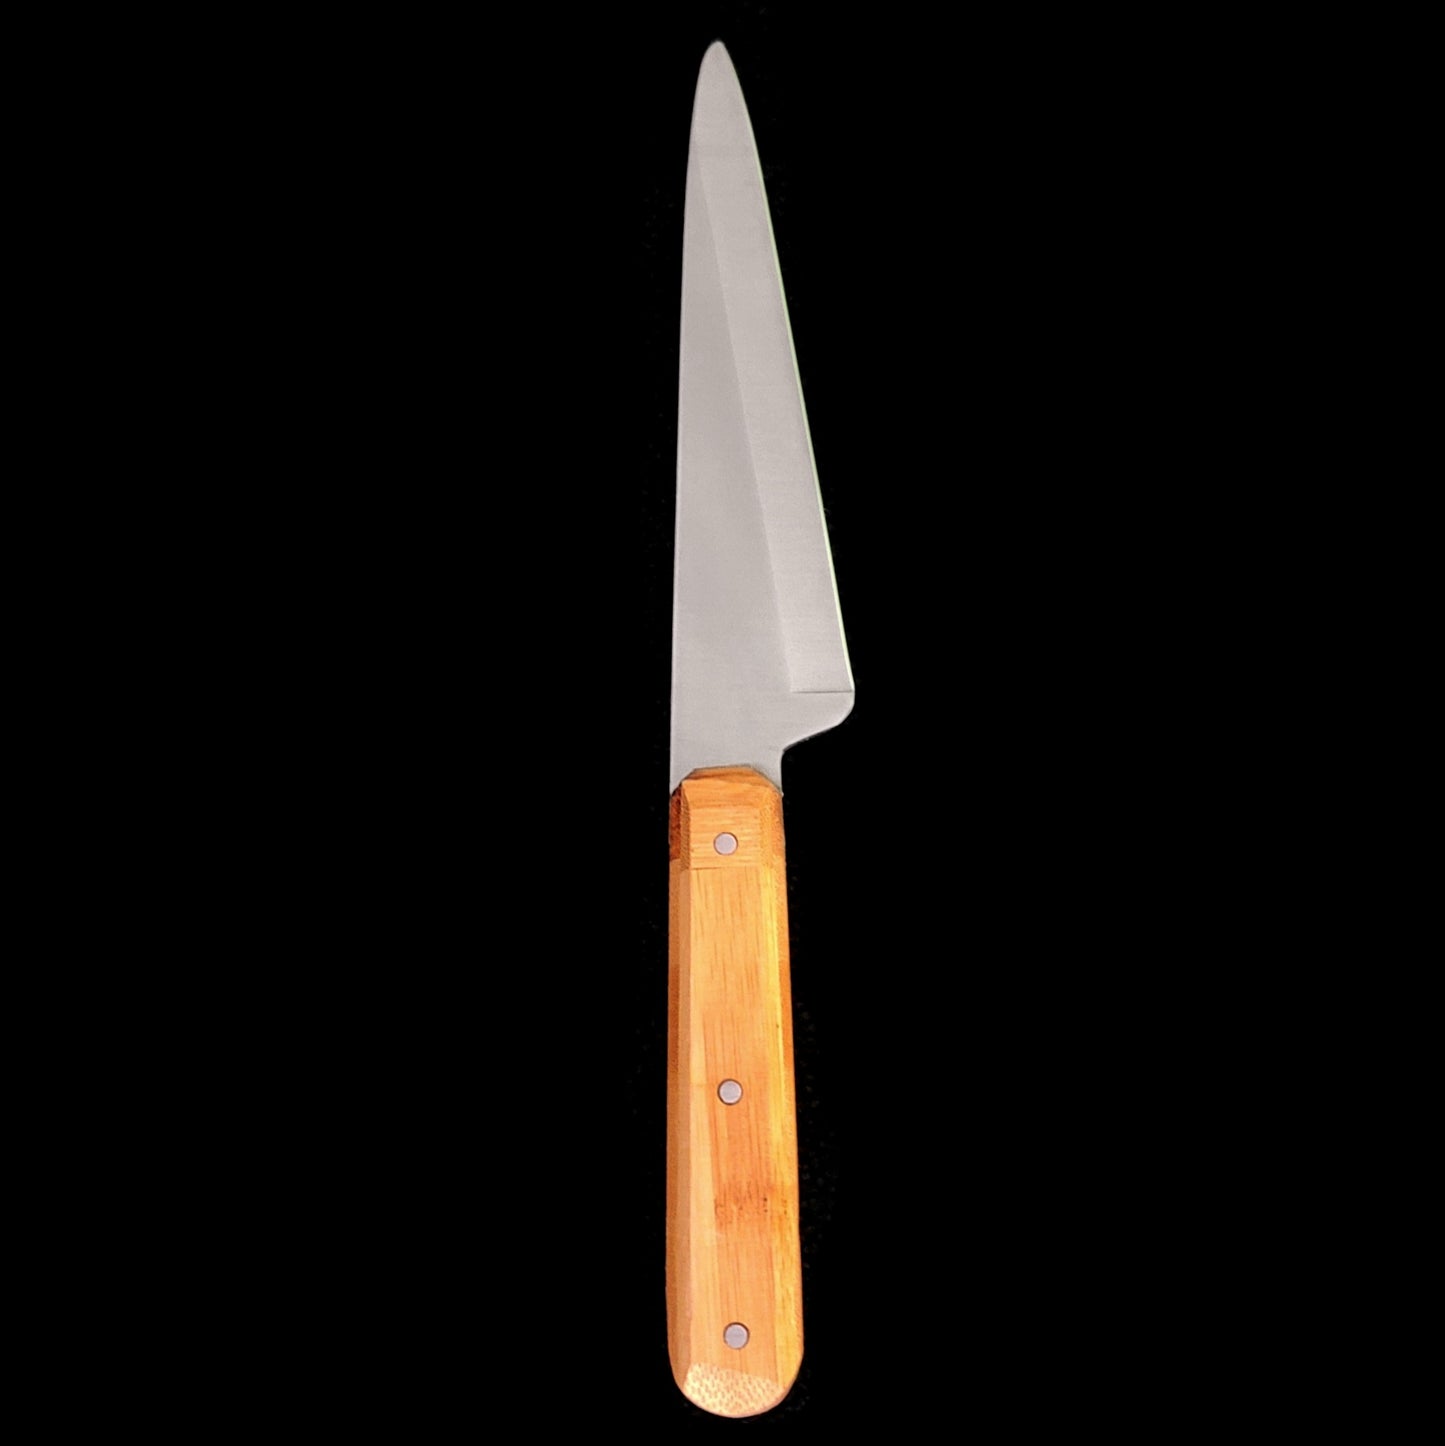 440 Stainless Steel Triangle Knife